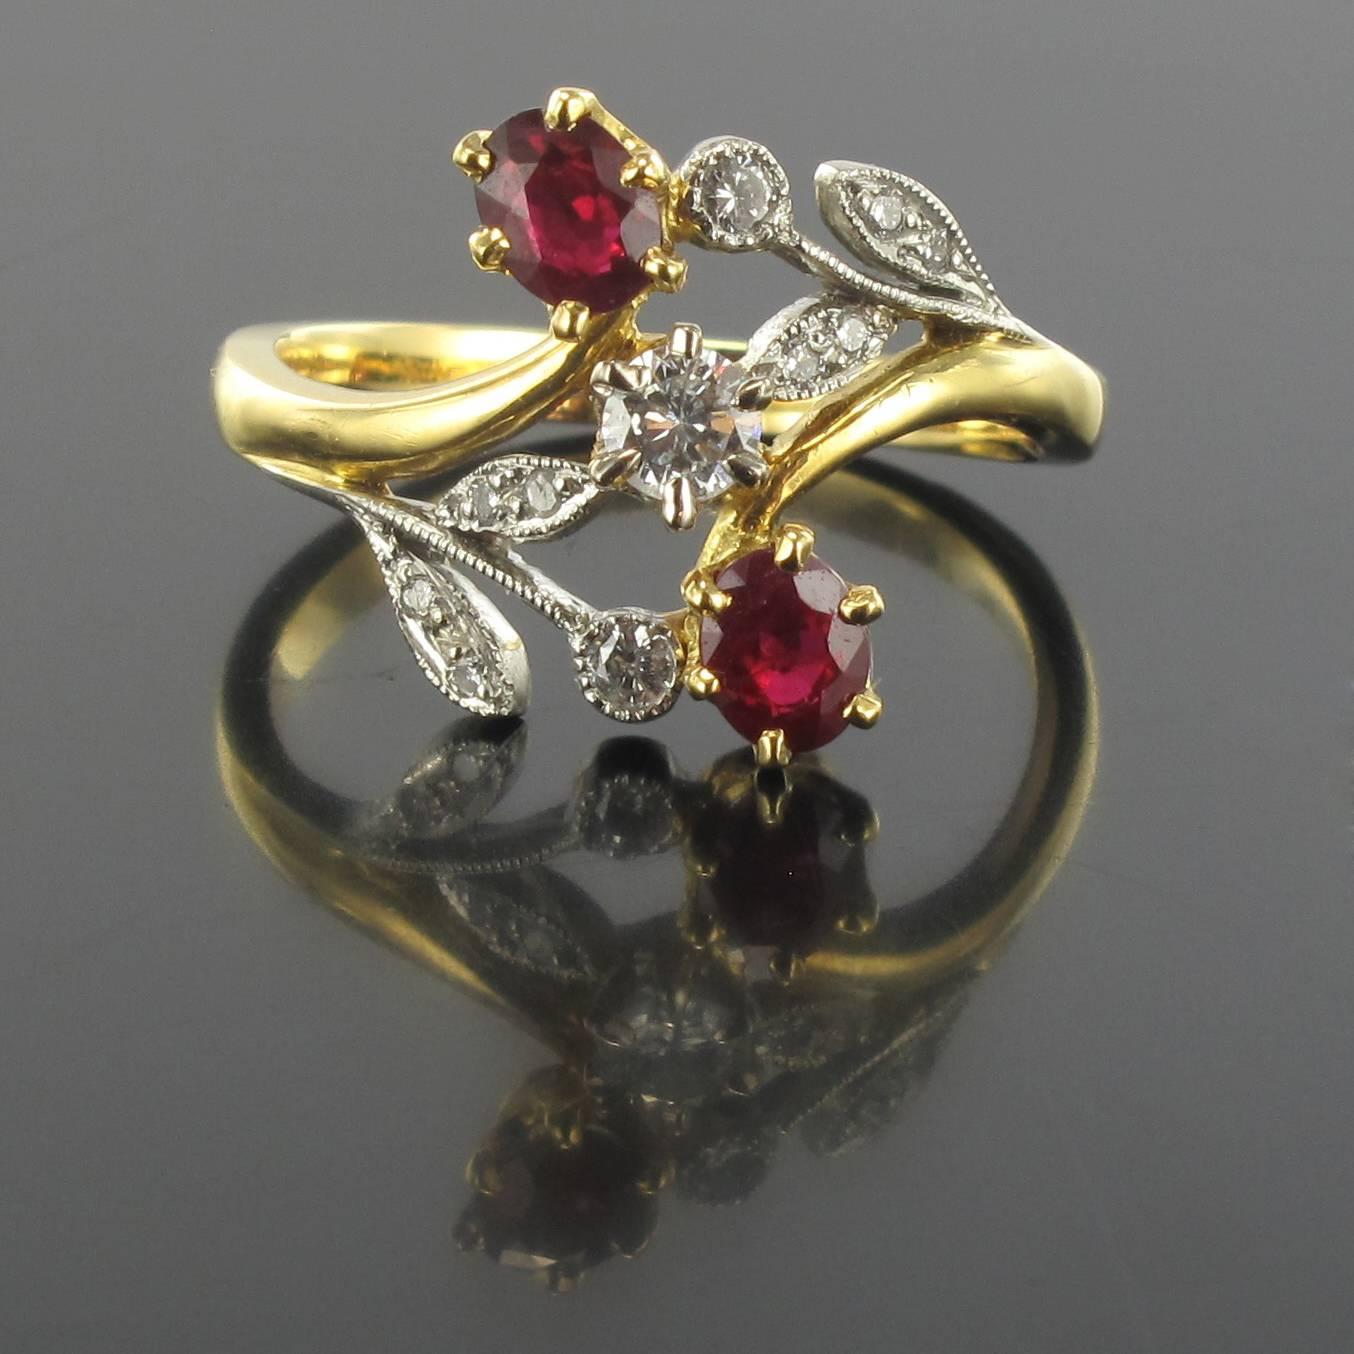 Ring in 18 carat yellow gold, and platinium, dog and eagle heads hallmarks. 

This ring is claw set with a brilliant cut diamond with oval rubies above and below surrounded by a floral décor entirely set with diamonds. 

Weight of ruby: 0.59